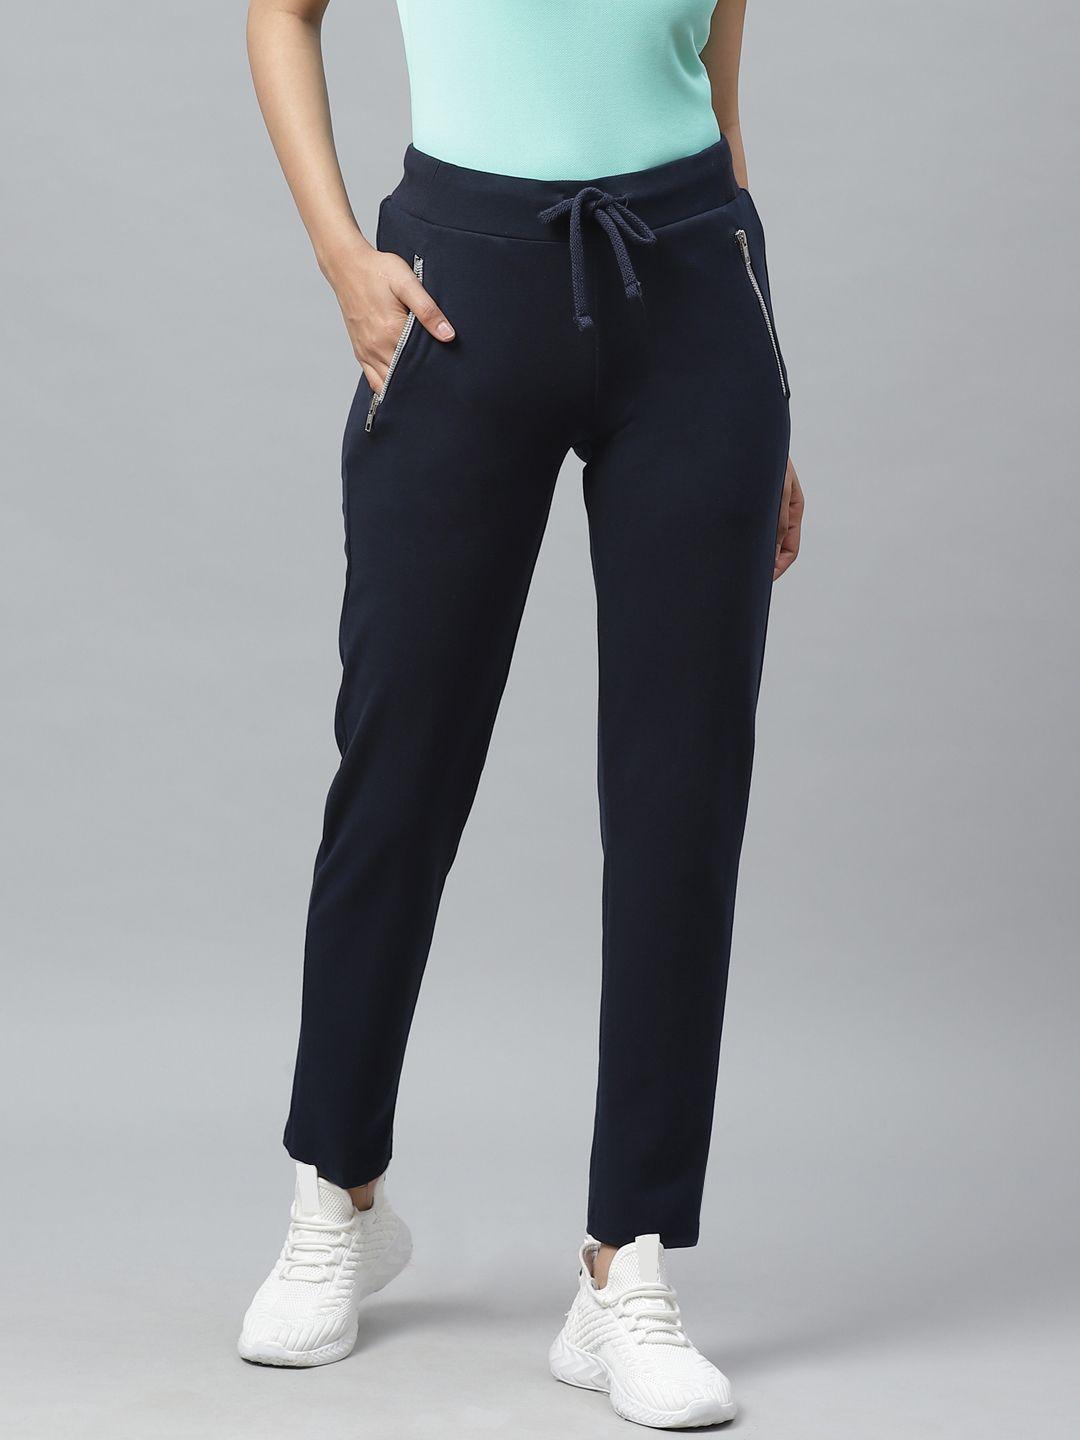 cayman women navy blue solid track pants